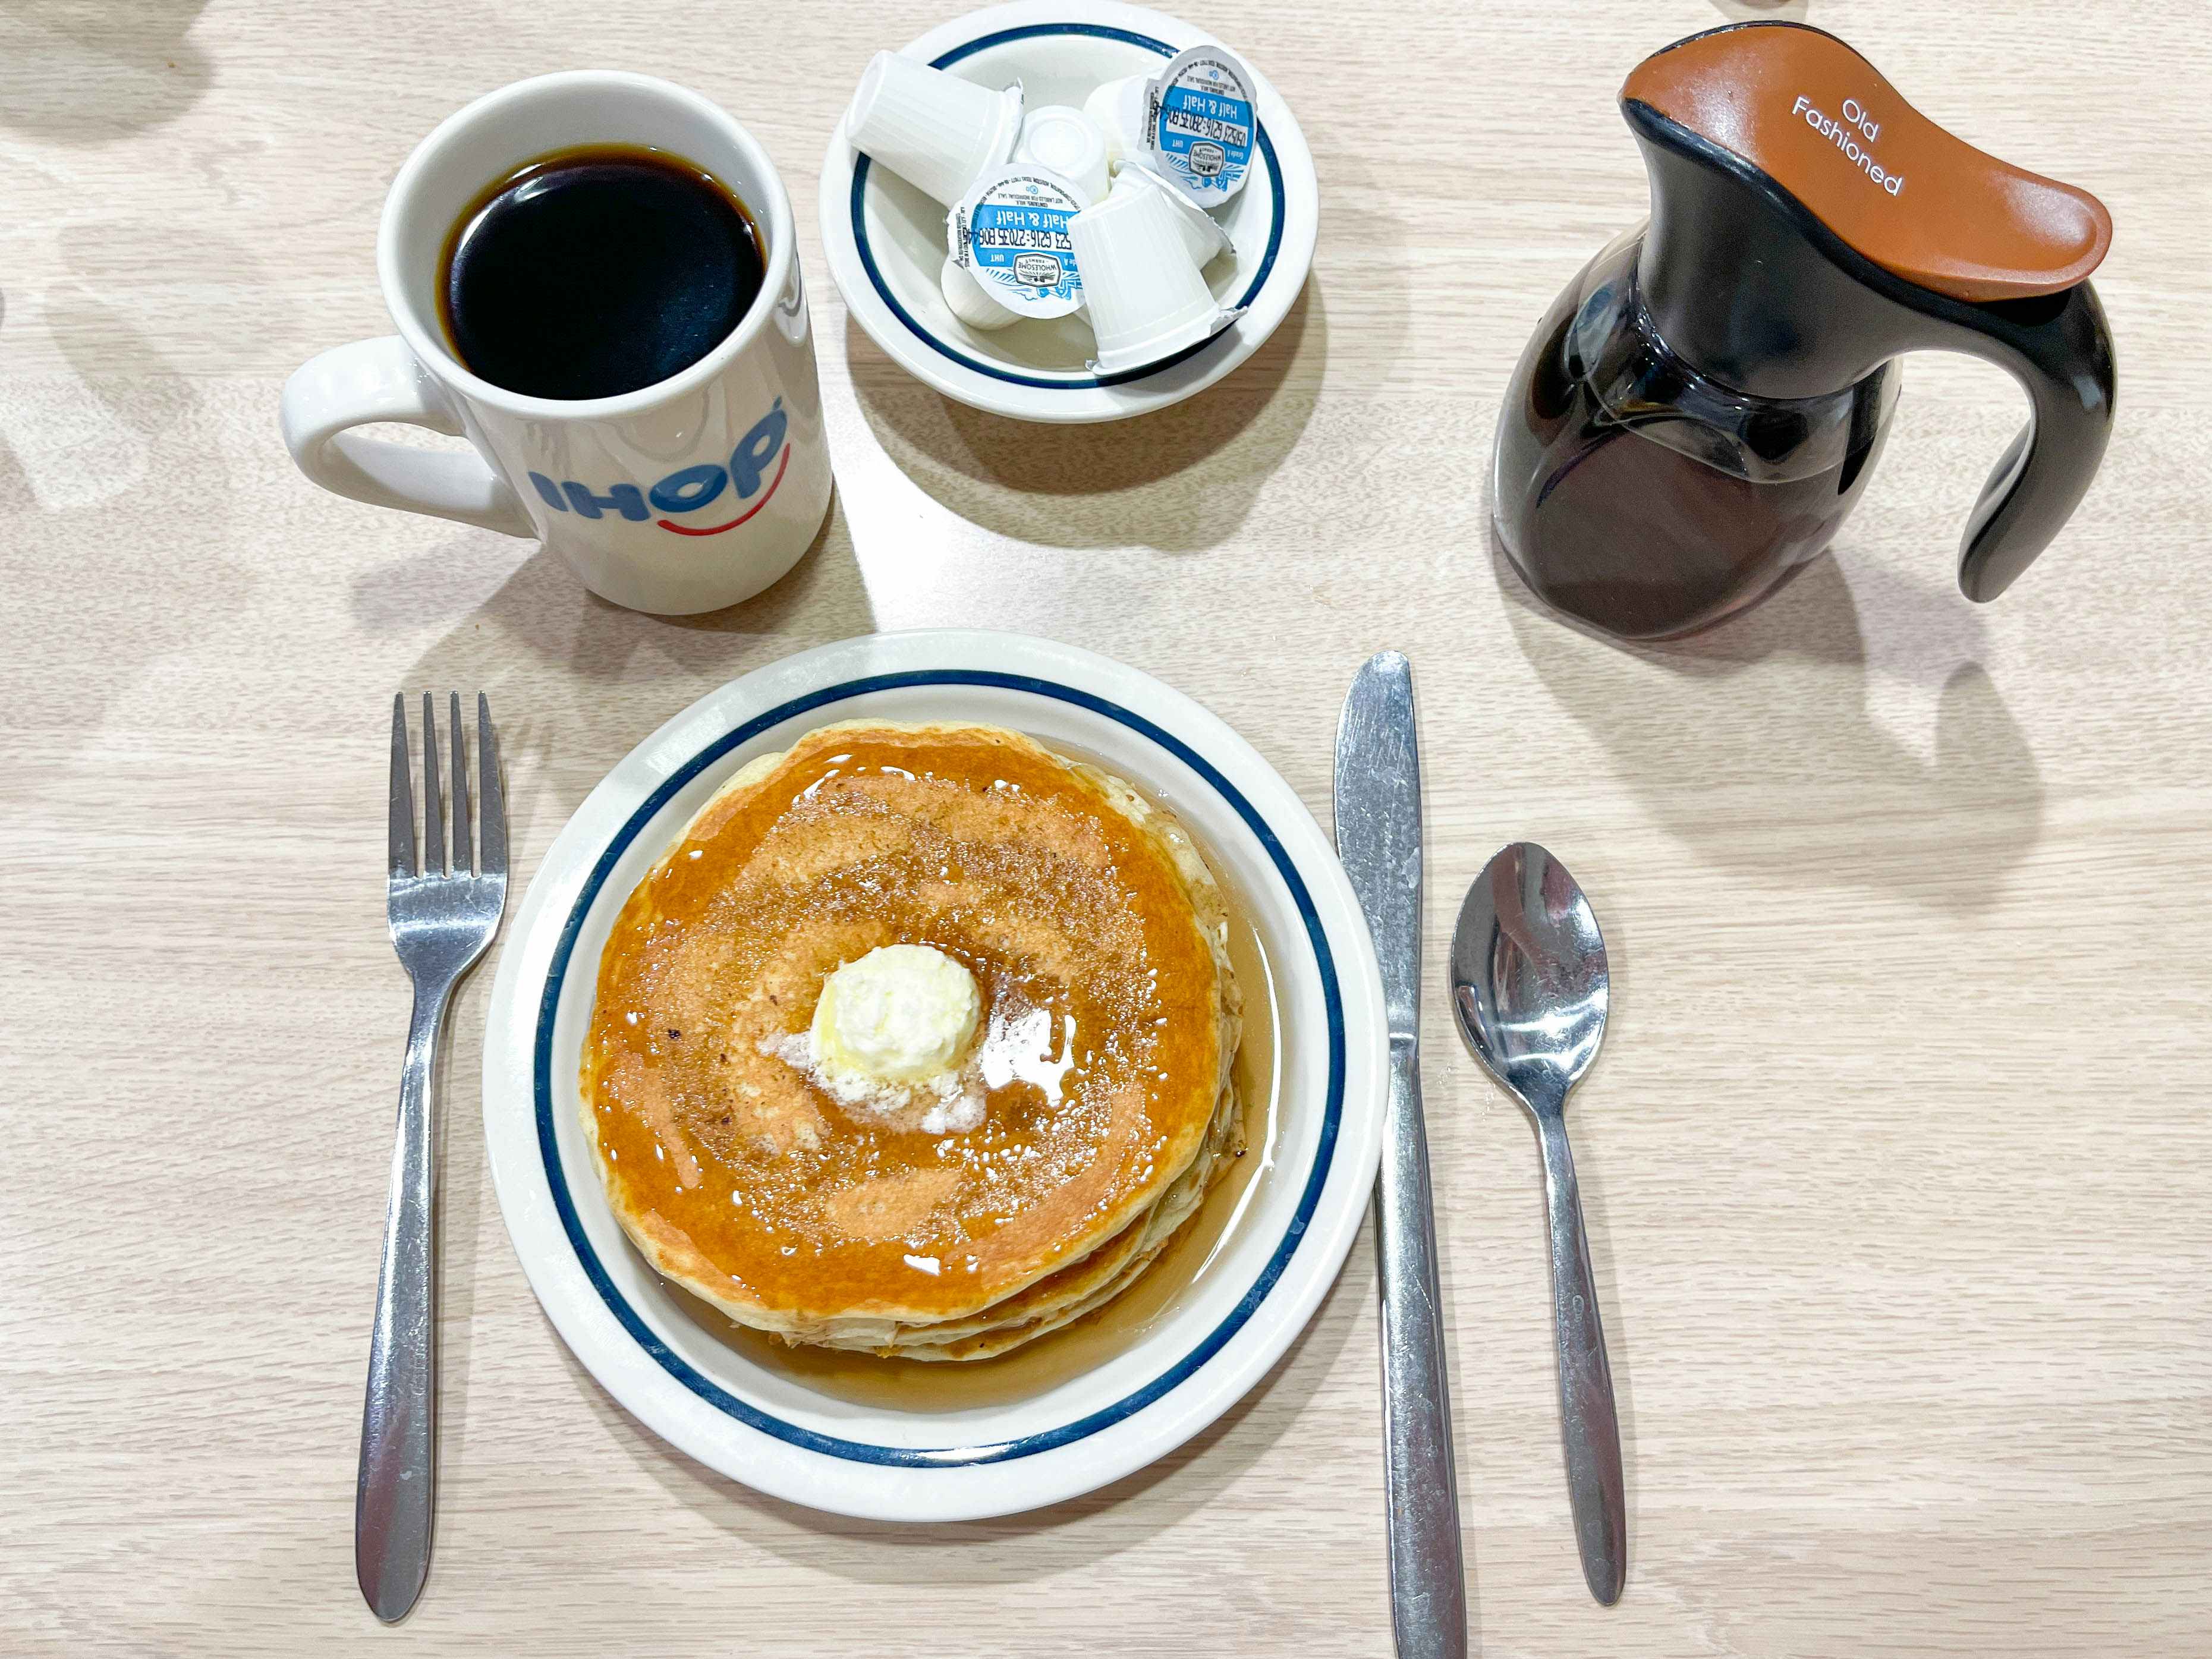 a plate with pancakes on a table with syrups